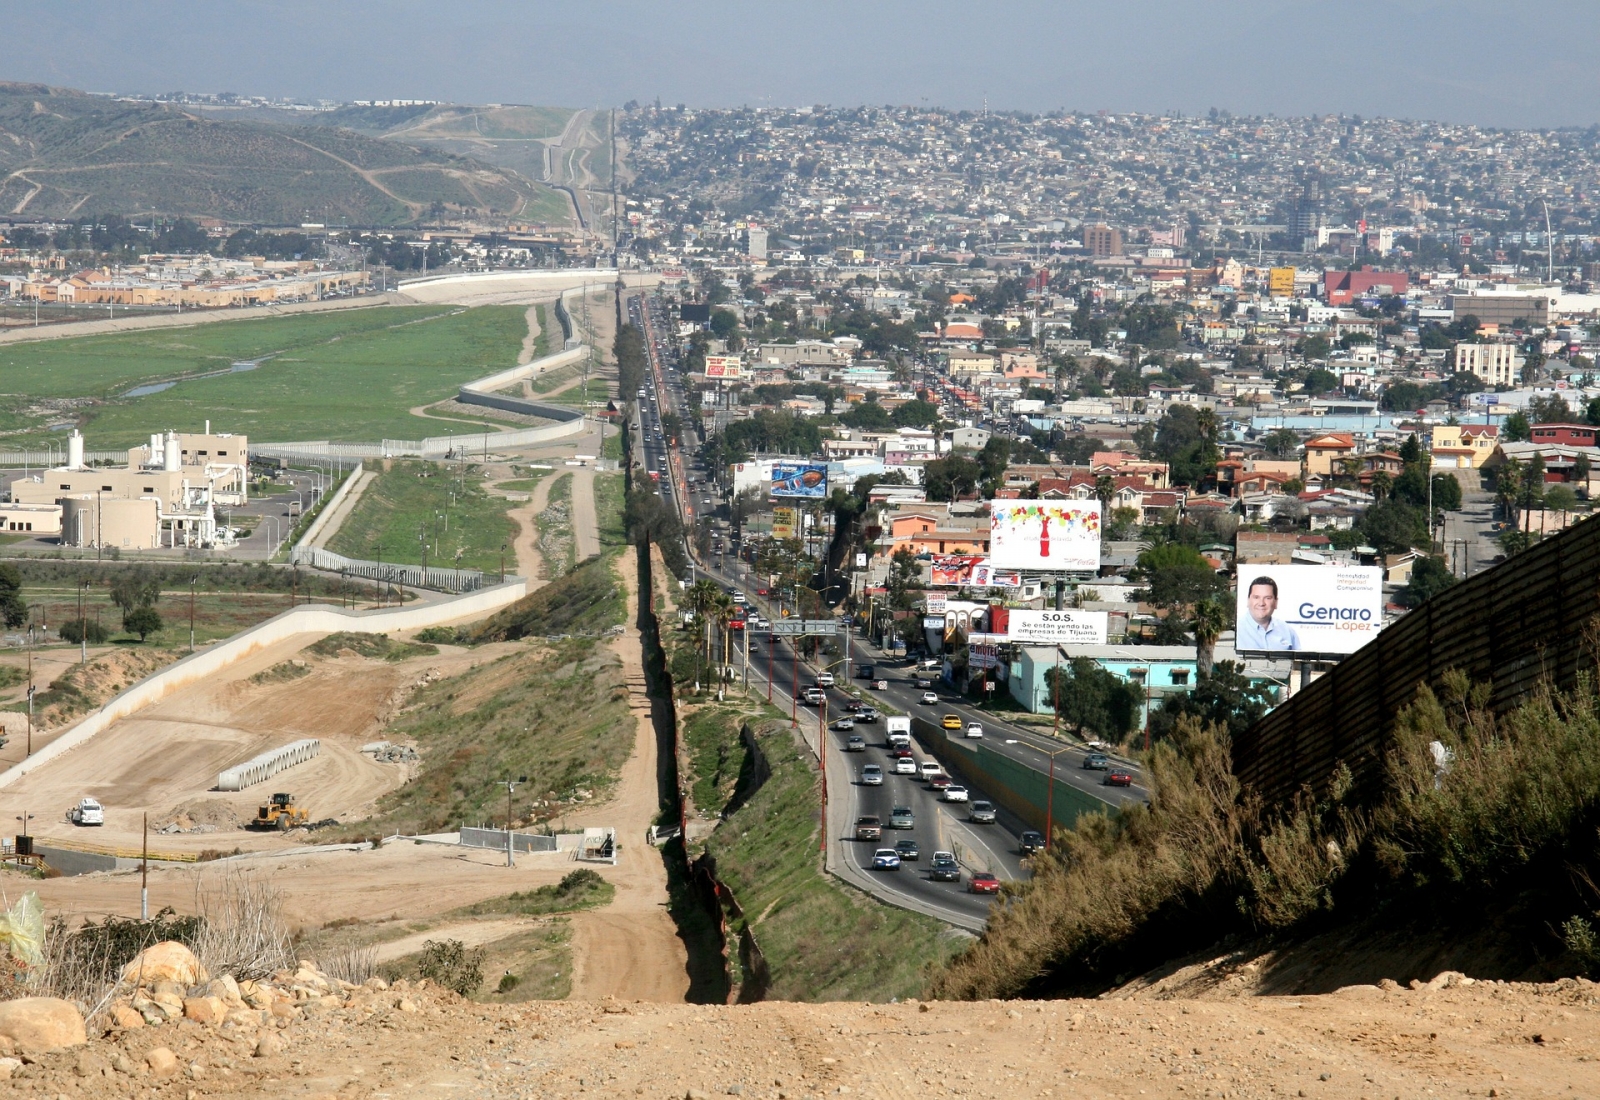 A photo of the border between the United States and Mexico showing sparse population on the US side and signs of high density populations on the Mexican side